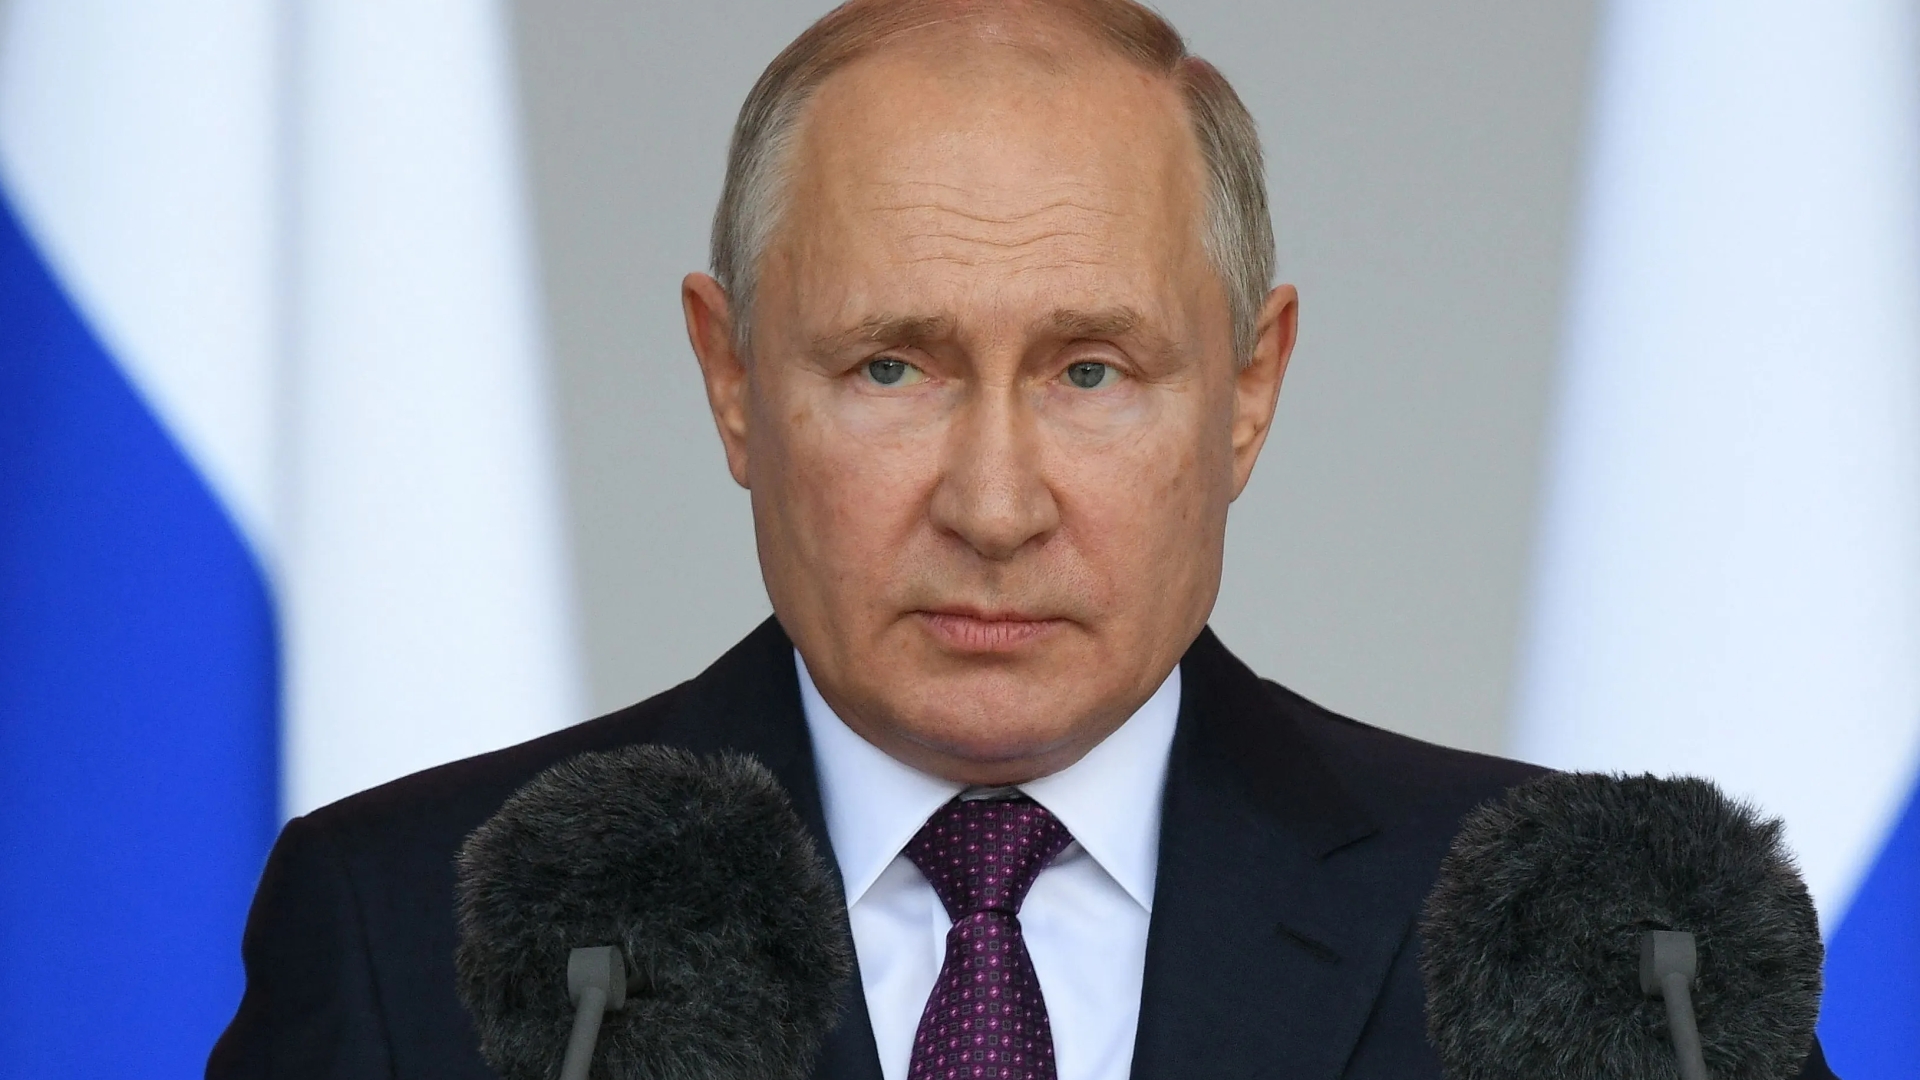 Ukraine news: Putin’s plan to rule world’s oceans by FORCE as he boasts 7,000mph Zircon missiles will wipe out enemies